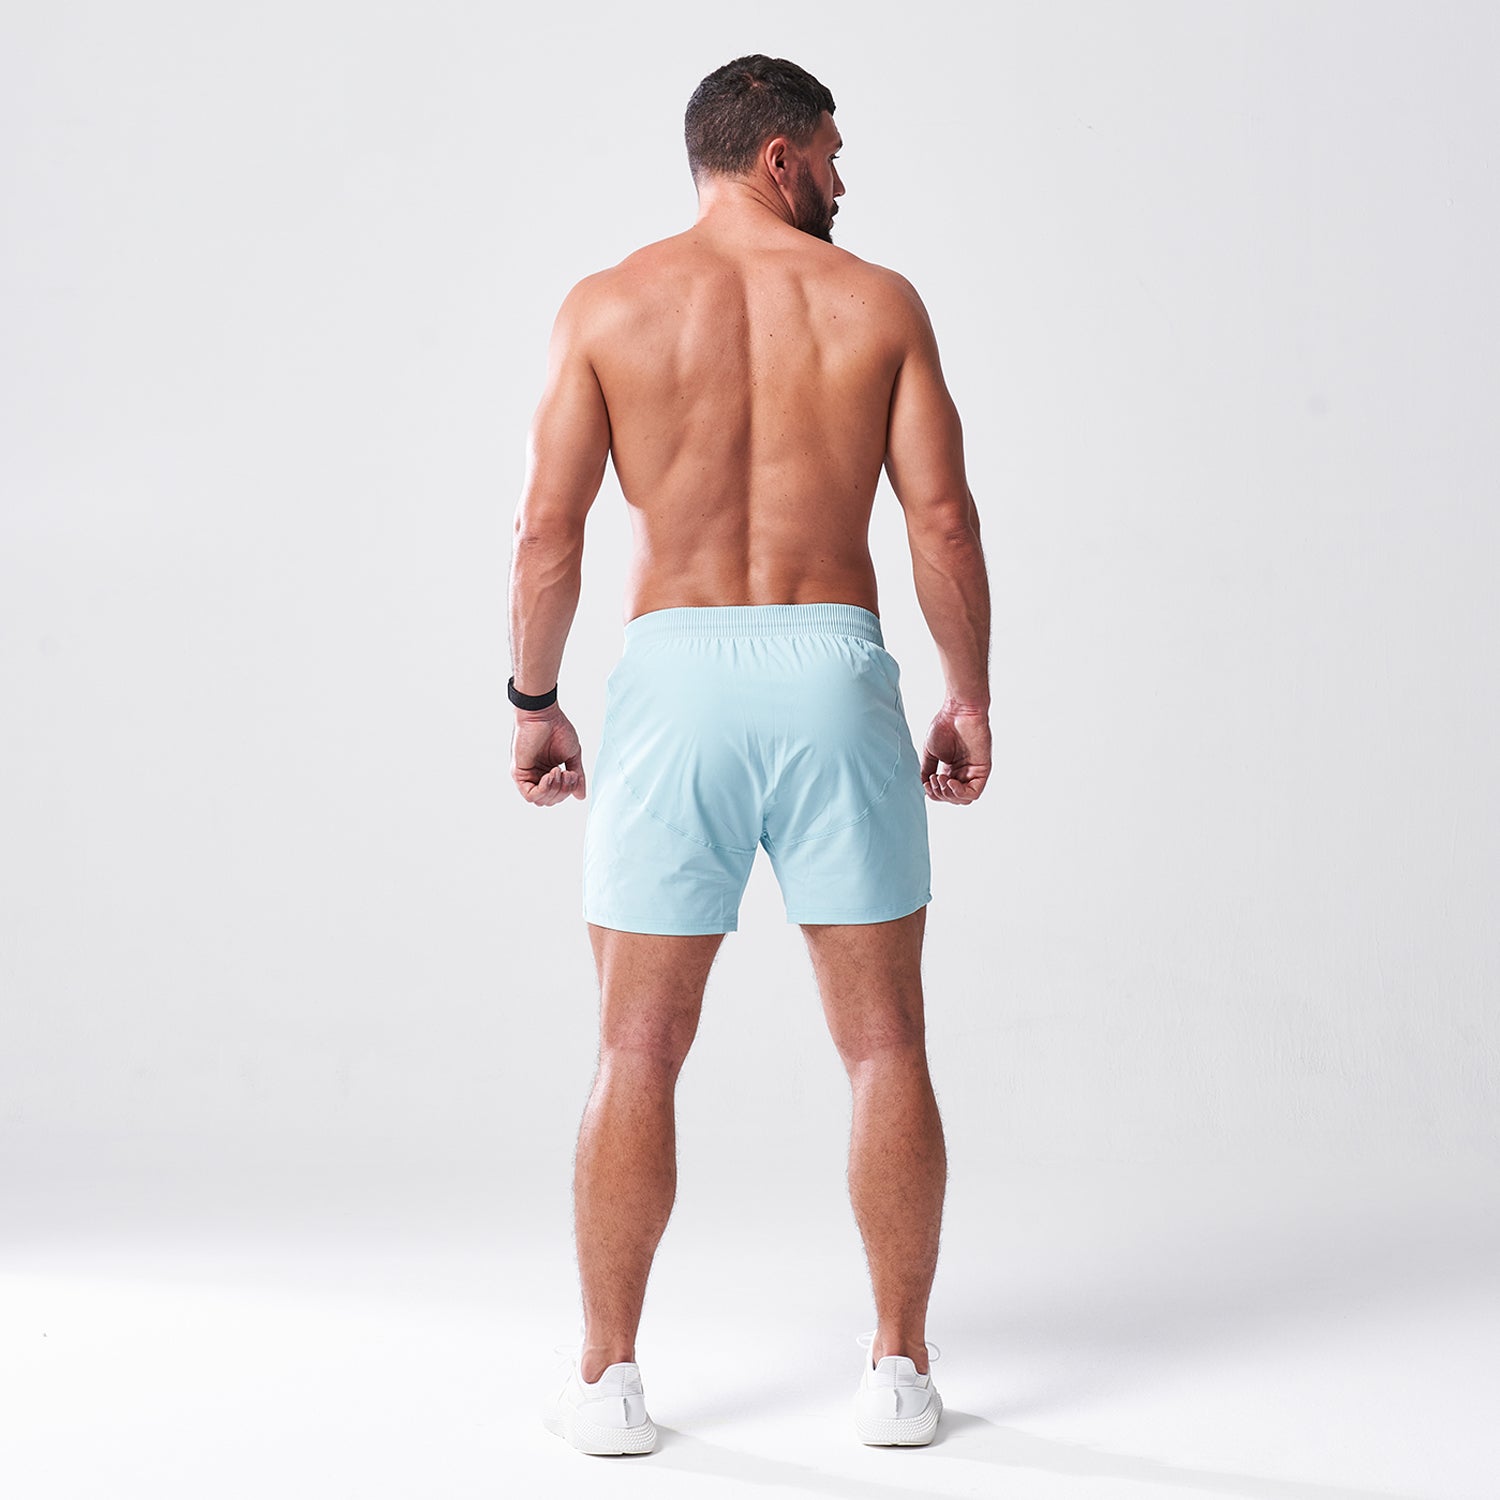 squatwolf-gym-wear-lab360-5-impact-shorts-canal-blue-workout-short-for-men